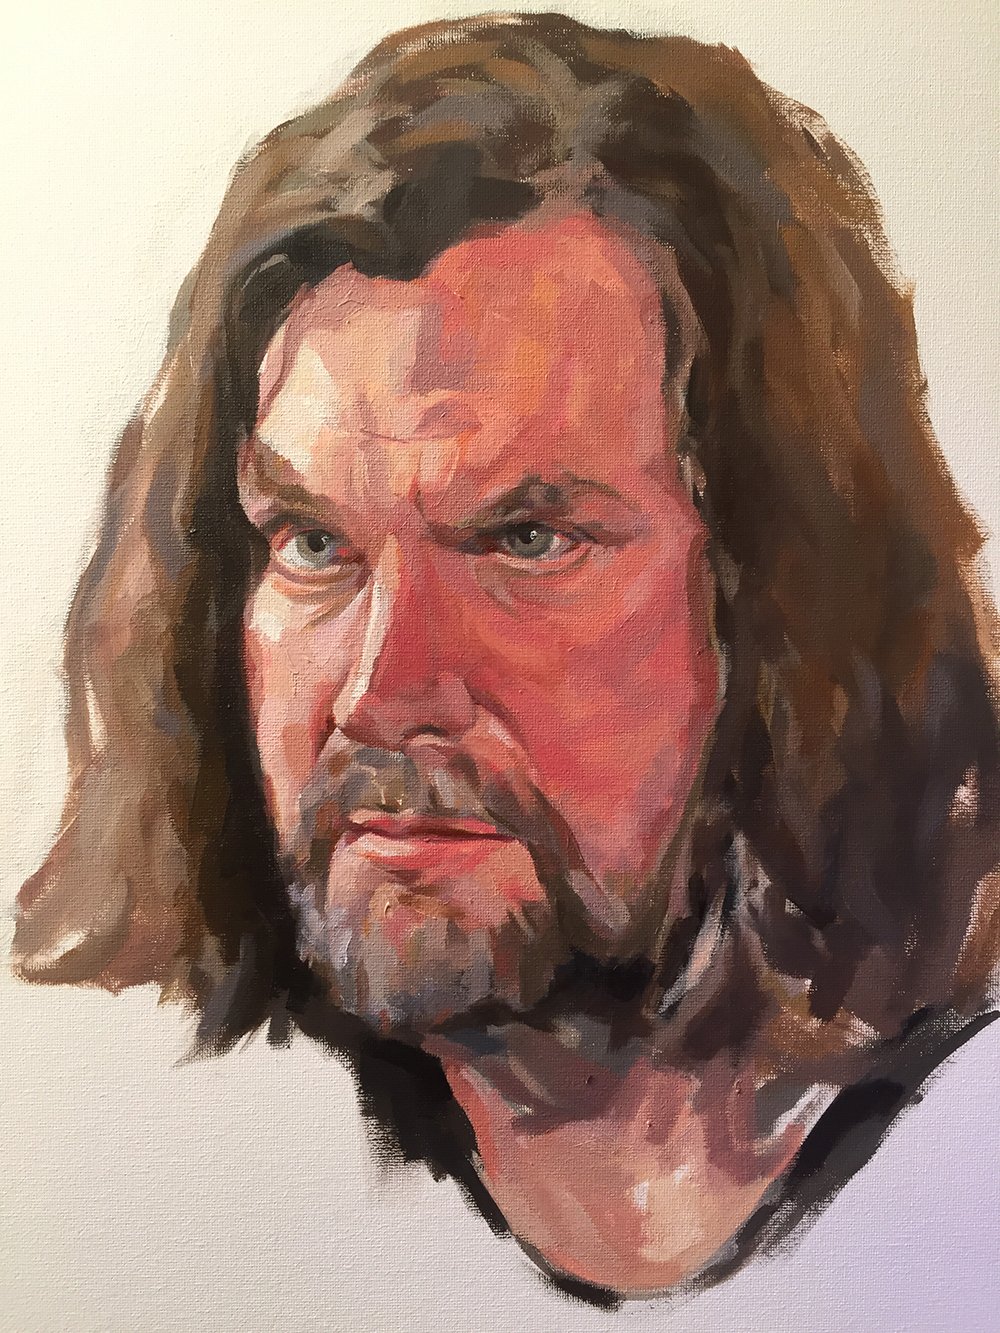 Portrait of Stuart Tree WIP by Jonathan Ing. Oil on canvas 16x20"